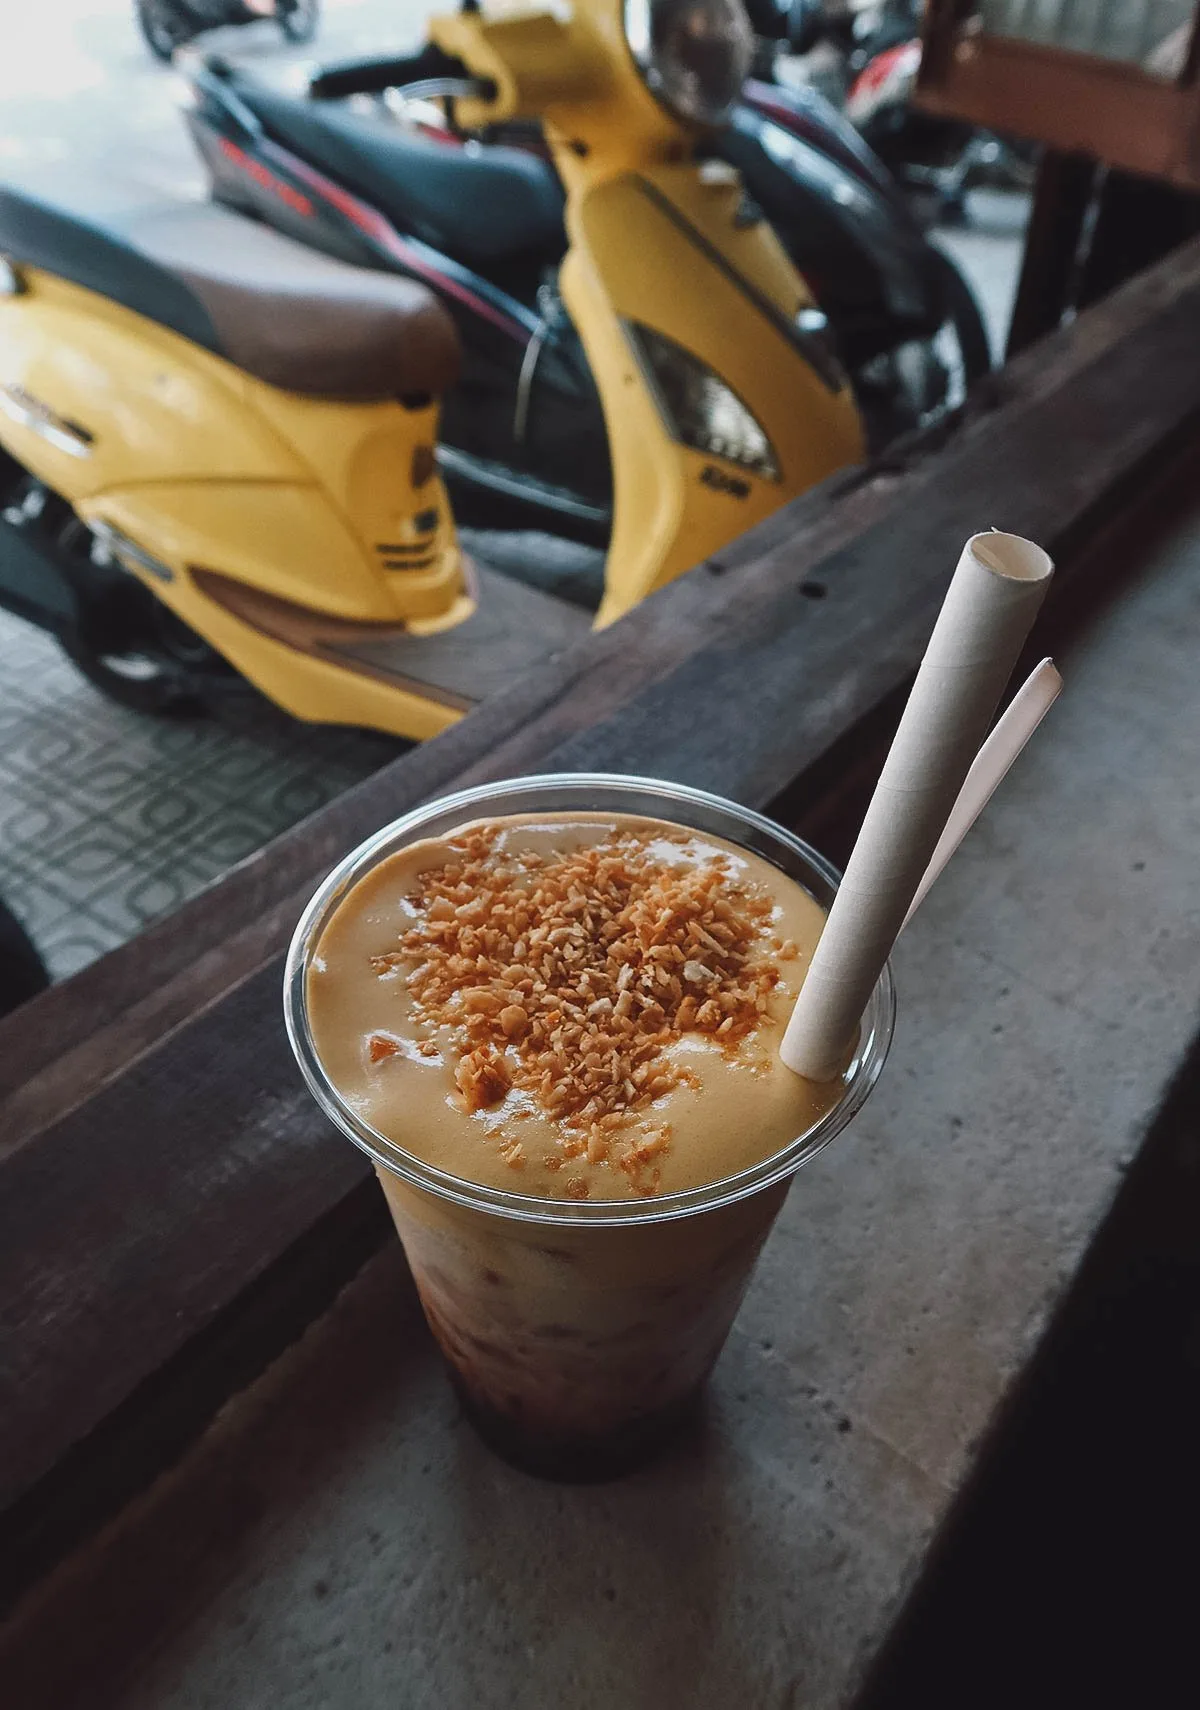 Egg coffee at a cafe in Danang, Vietnam